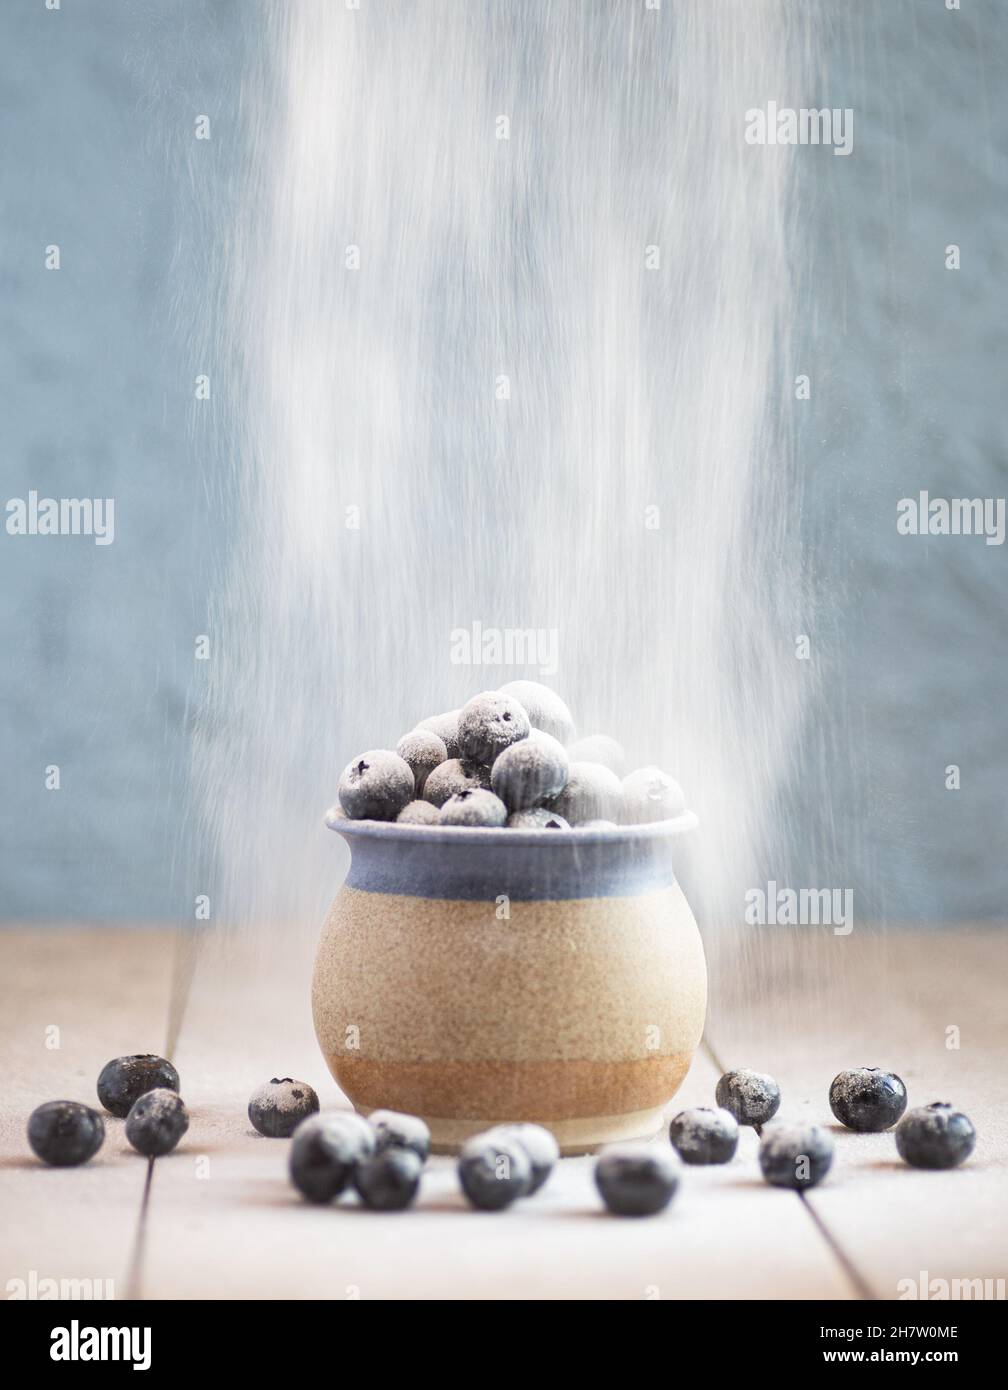 A stoneware cup filled with blueberries on a ceramic surface. Dusting powder sieved on to the berries Stock Photo